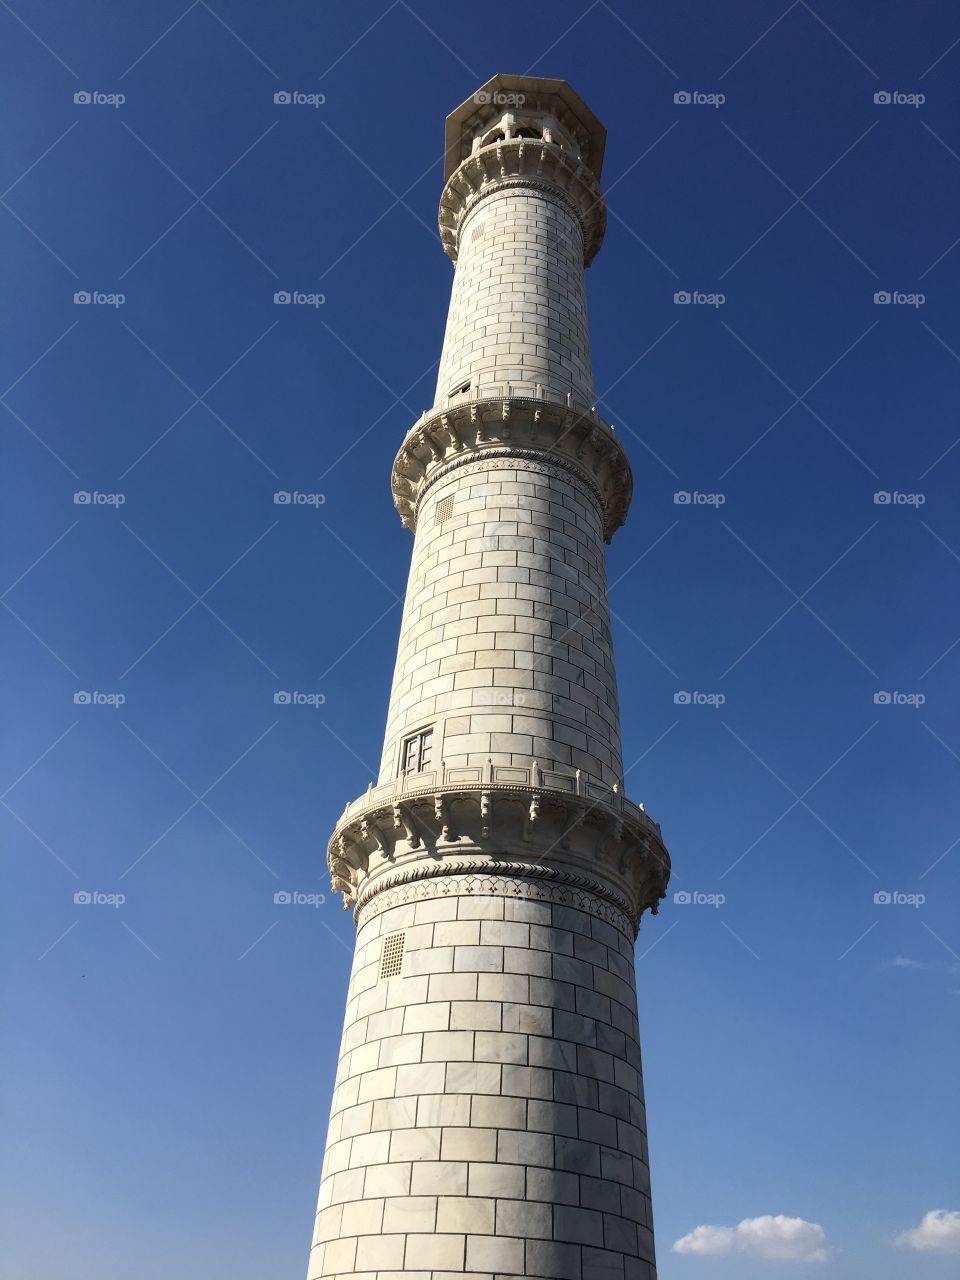 Architecture, No Person, Tower, Travel, Sky